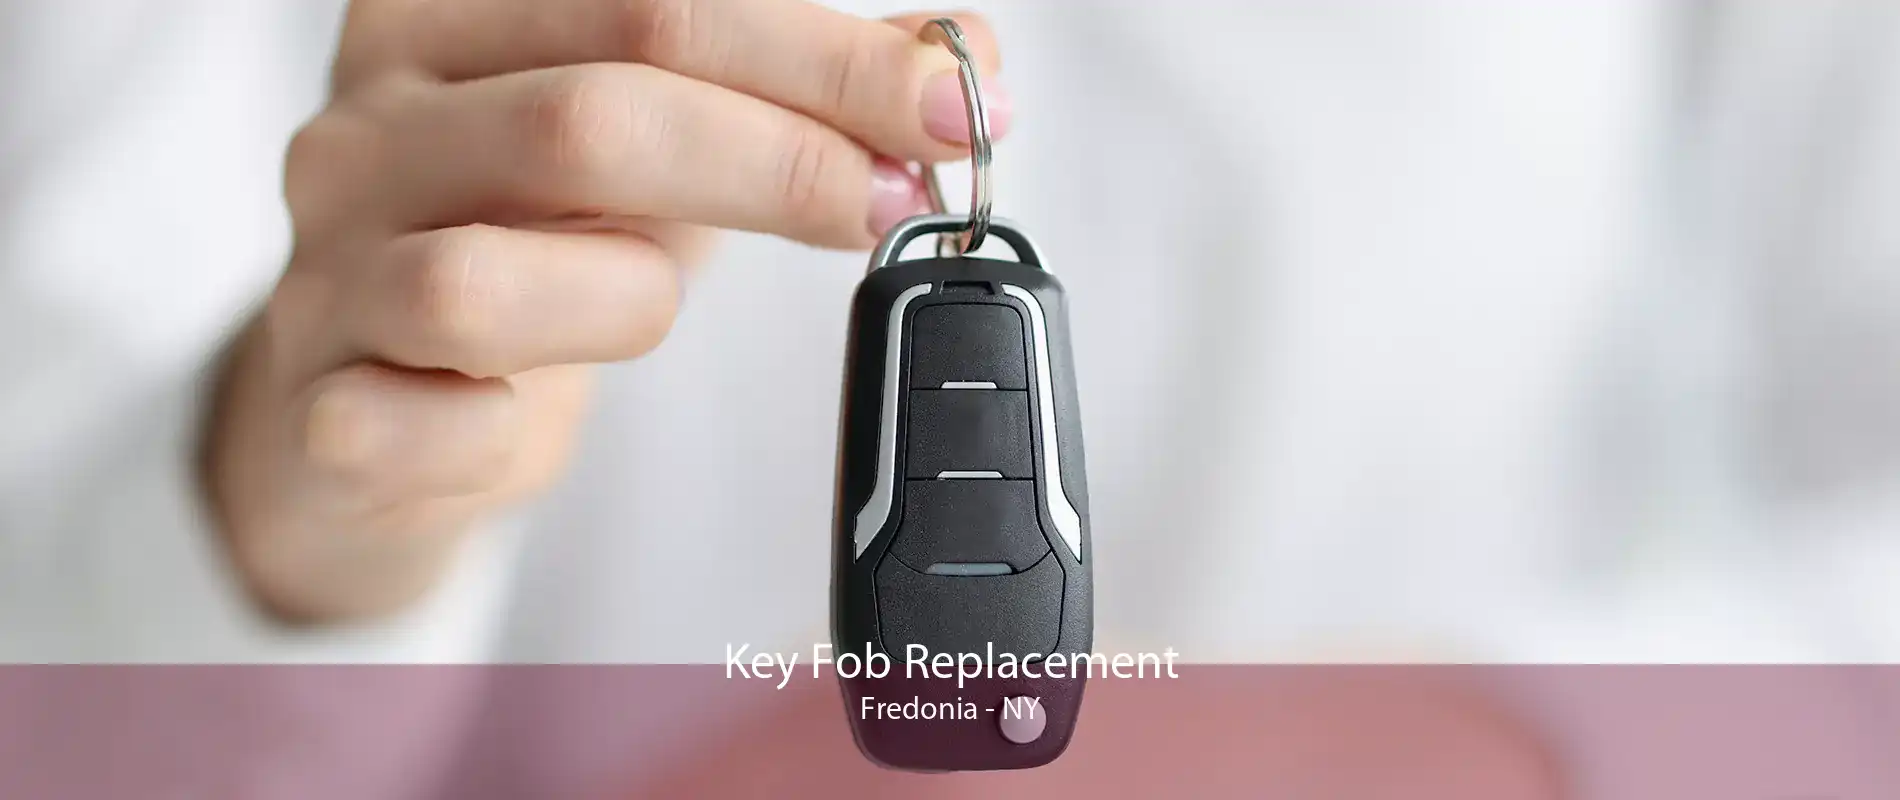 Key Fob Replacement Fredonia - NY